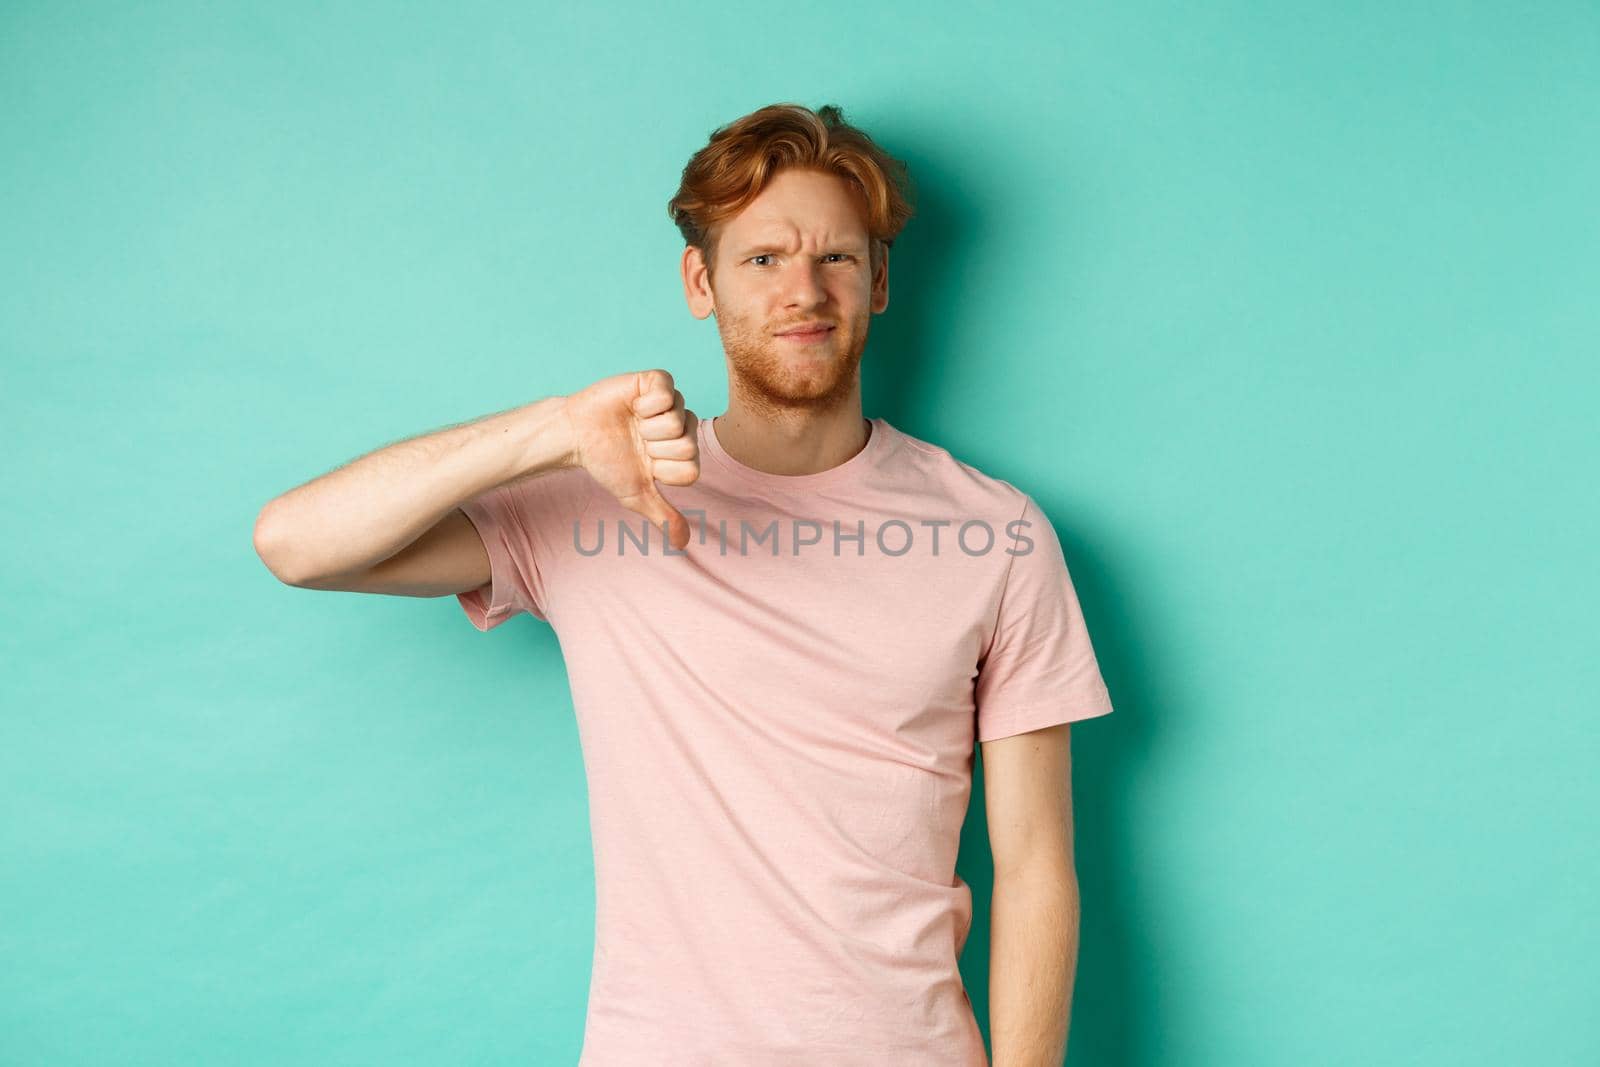 Disappointed redhead man showing thumbs-down, frowning and looking skeptical, epxress dislike and disapproval, standing over turquoise background.